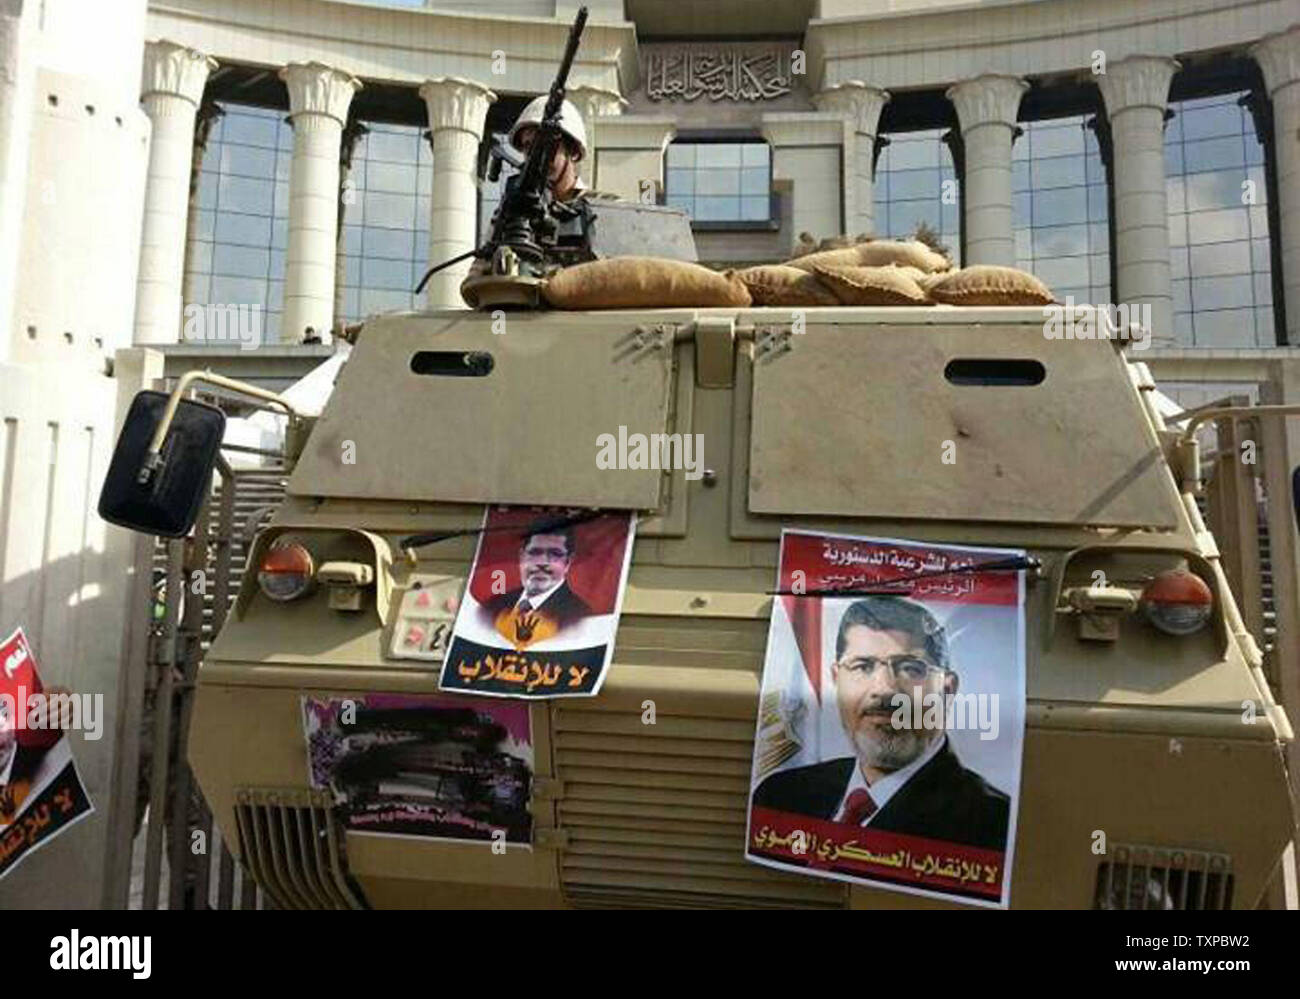 Posters of Egypt's ousted President Mohammed Morsi are seen on a tank outside of  his trial in Cairo, Egypt, November, 4, 2013. Egypt's deposed president Mohamed Morsi appeared in court Monday on the first day of his trial, rejecting its legitimacy and demanding 'coup' leaders be prosecuted, as thousands of his supporters rallied. UPI/Ahmed Jomaa Stock Photo